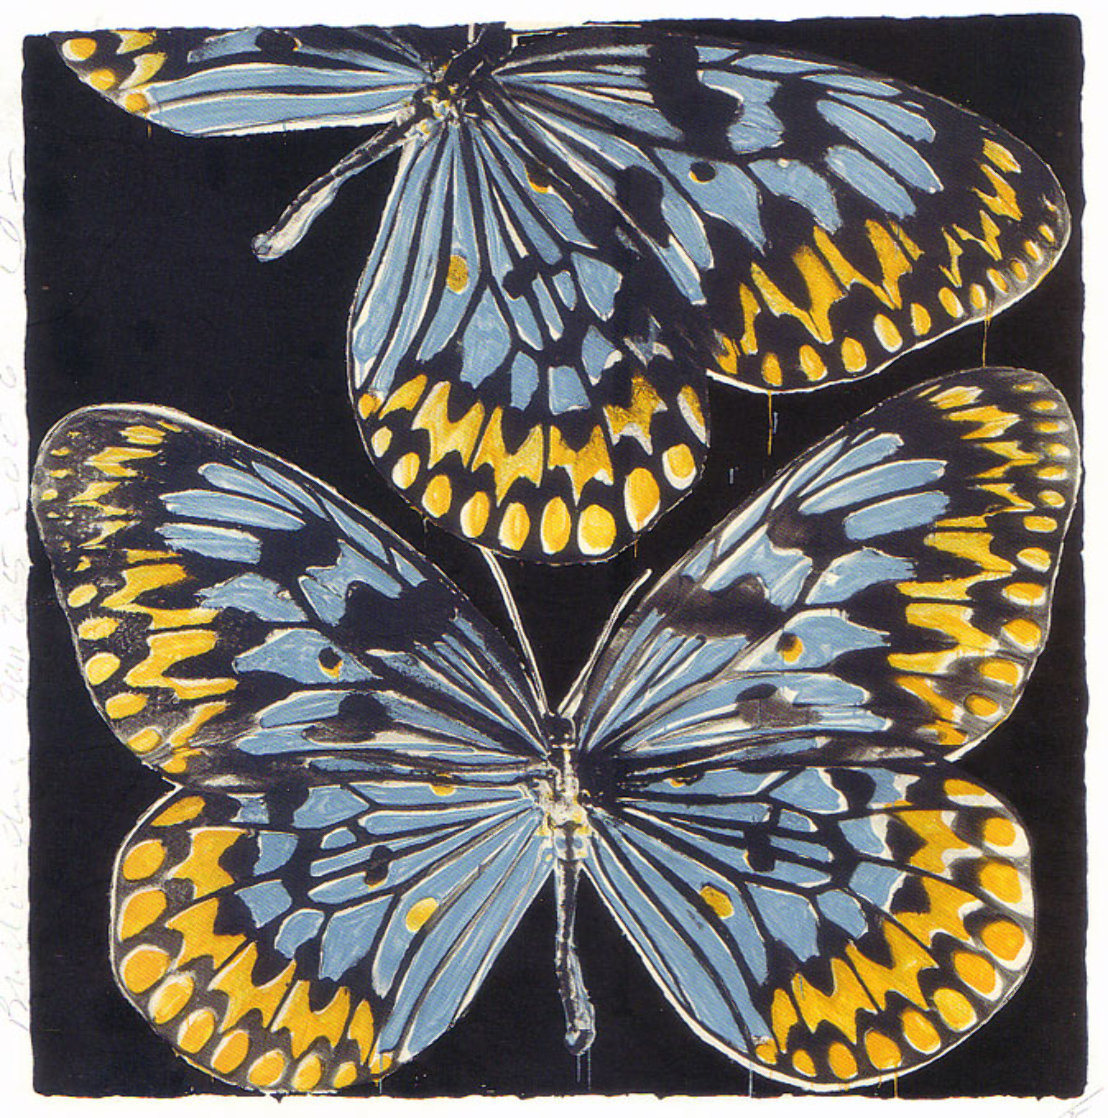 Butterflies - Monarch 2006 Limited Edition Print by Donald Sultan